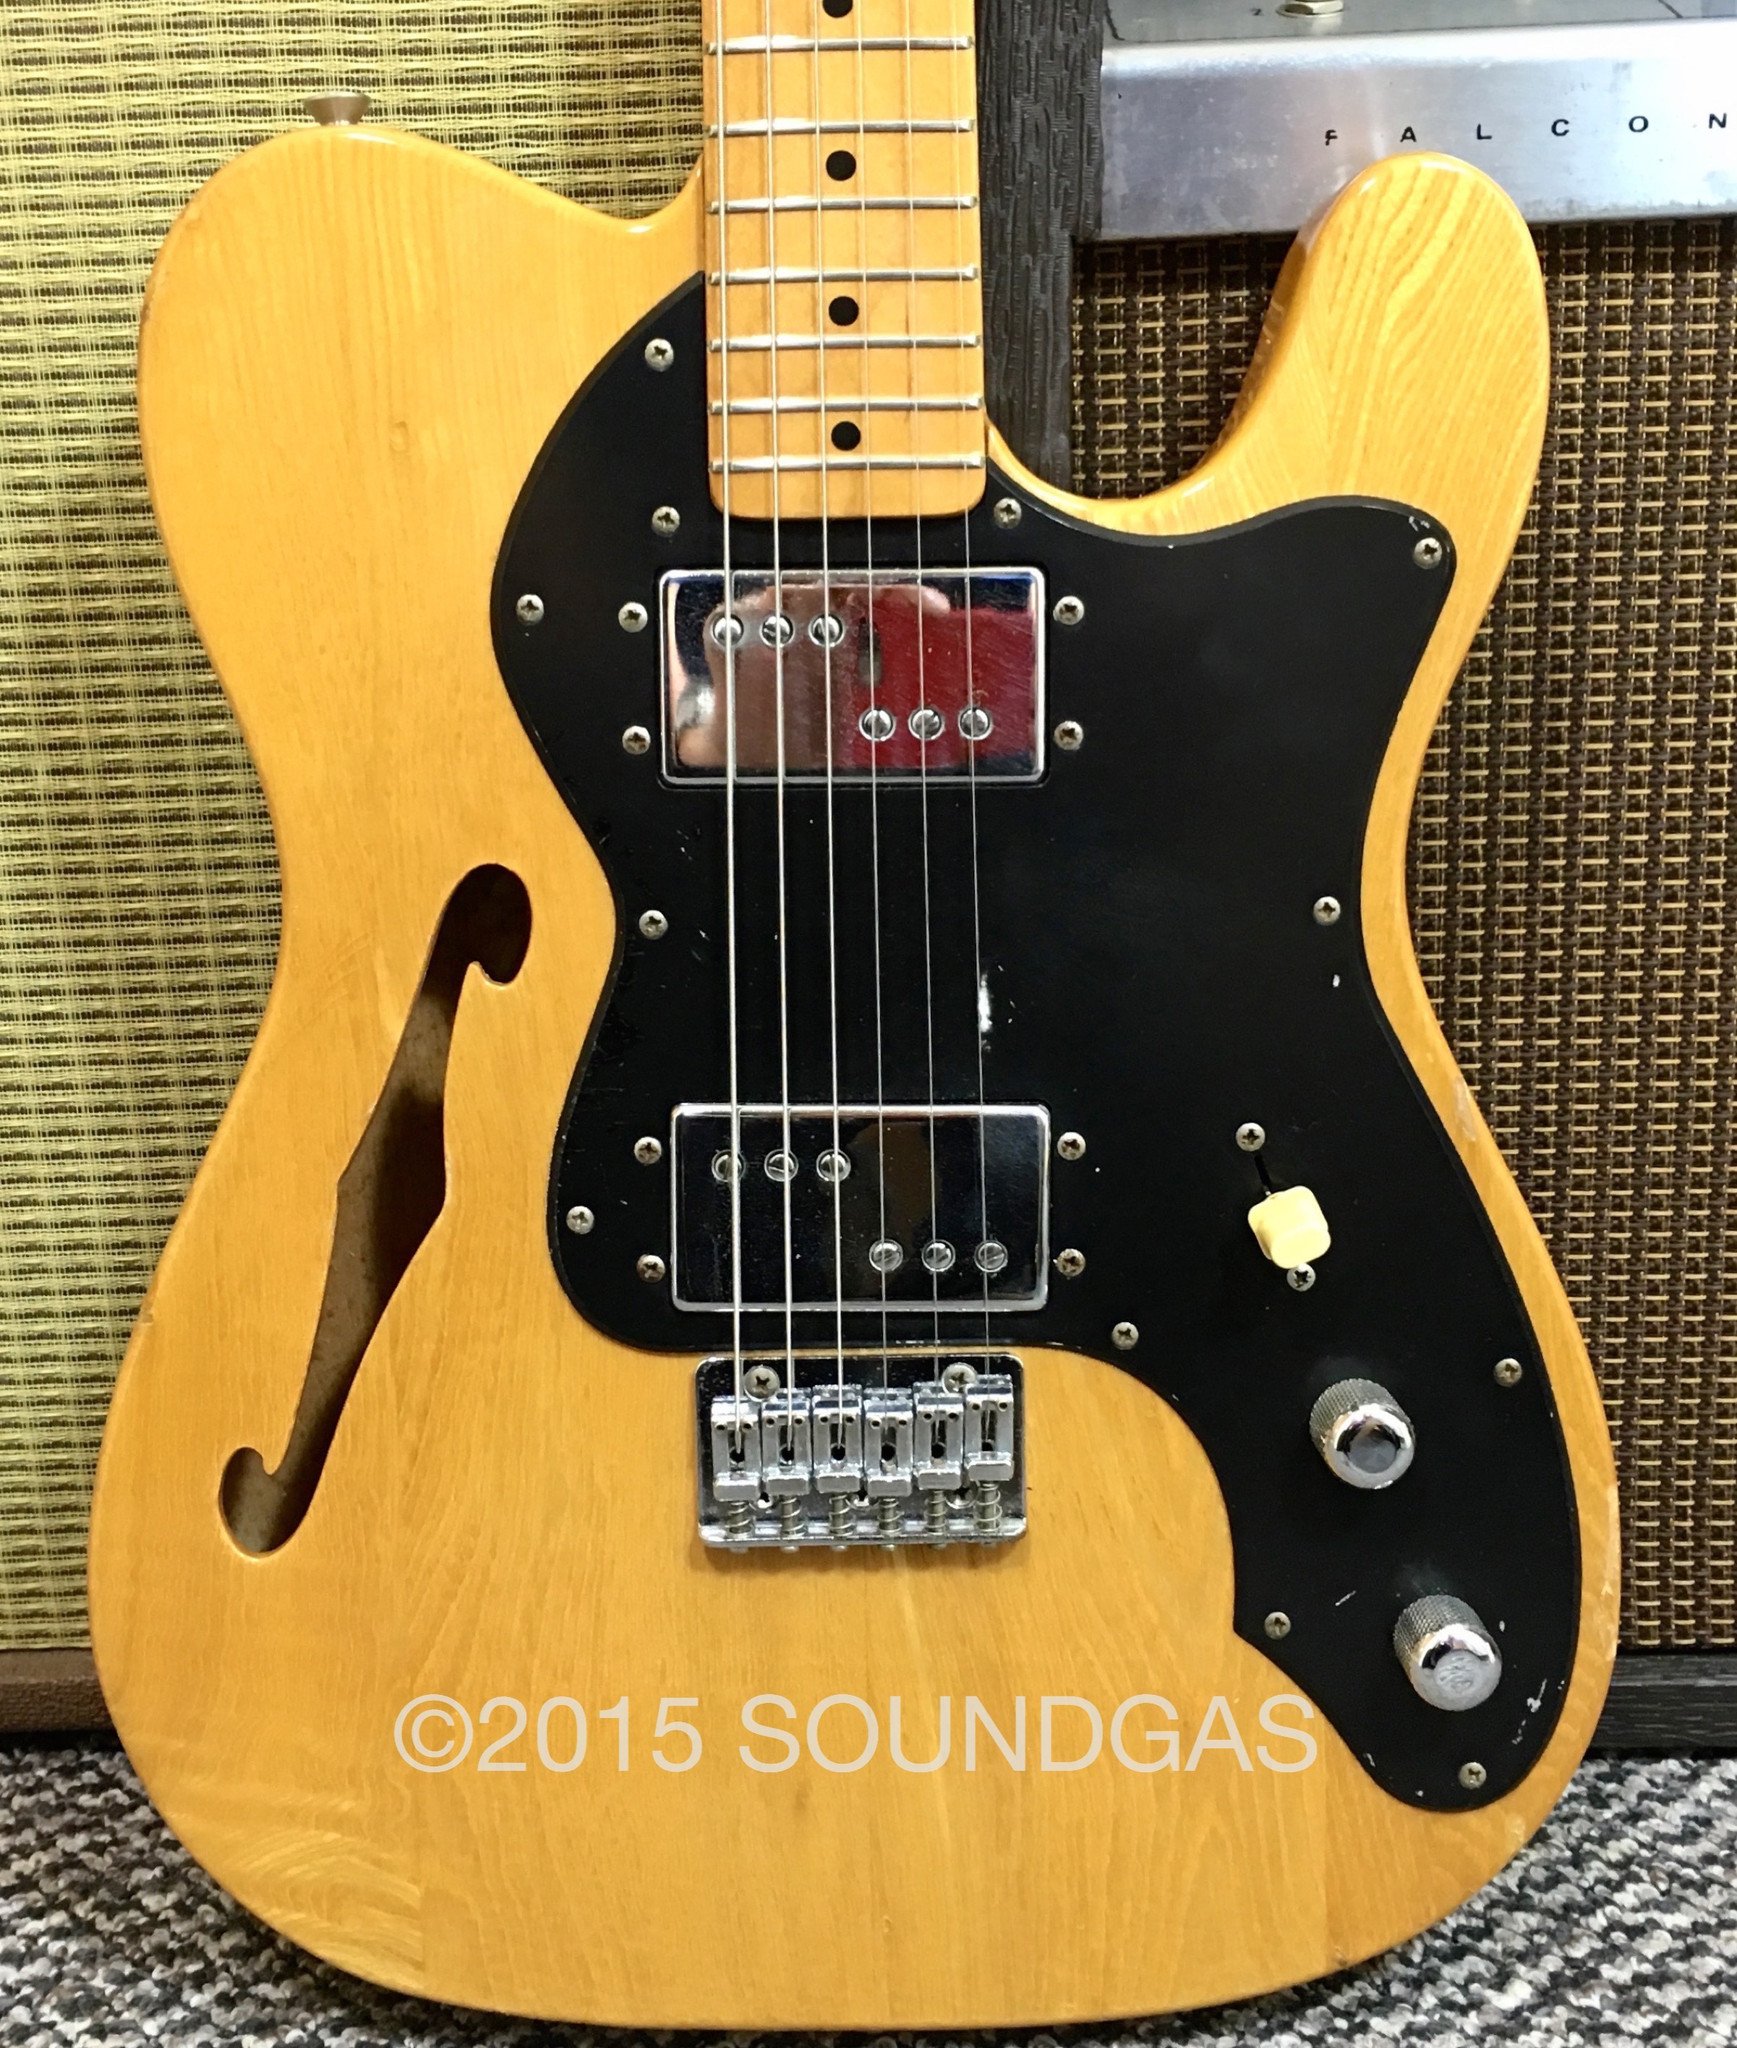 GRECO SPACEY SOUNDS TE-500 - 1979 Japanese Thinline Telecaster